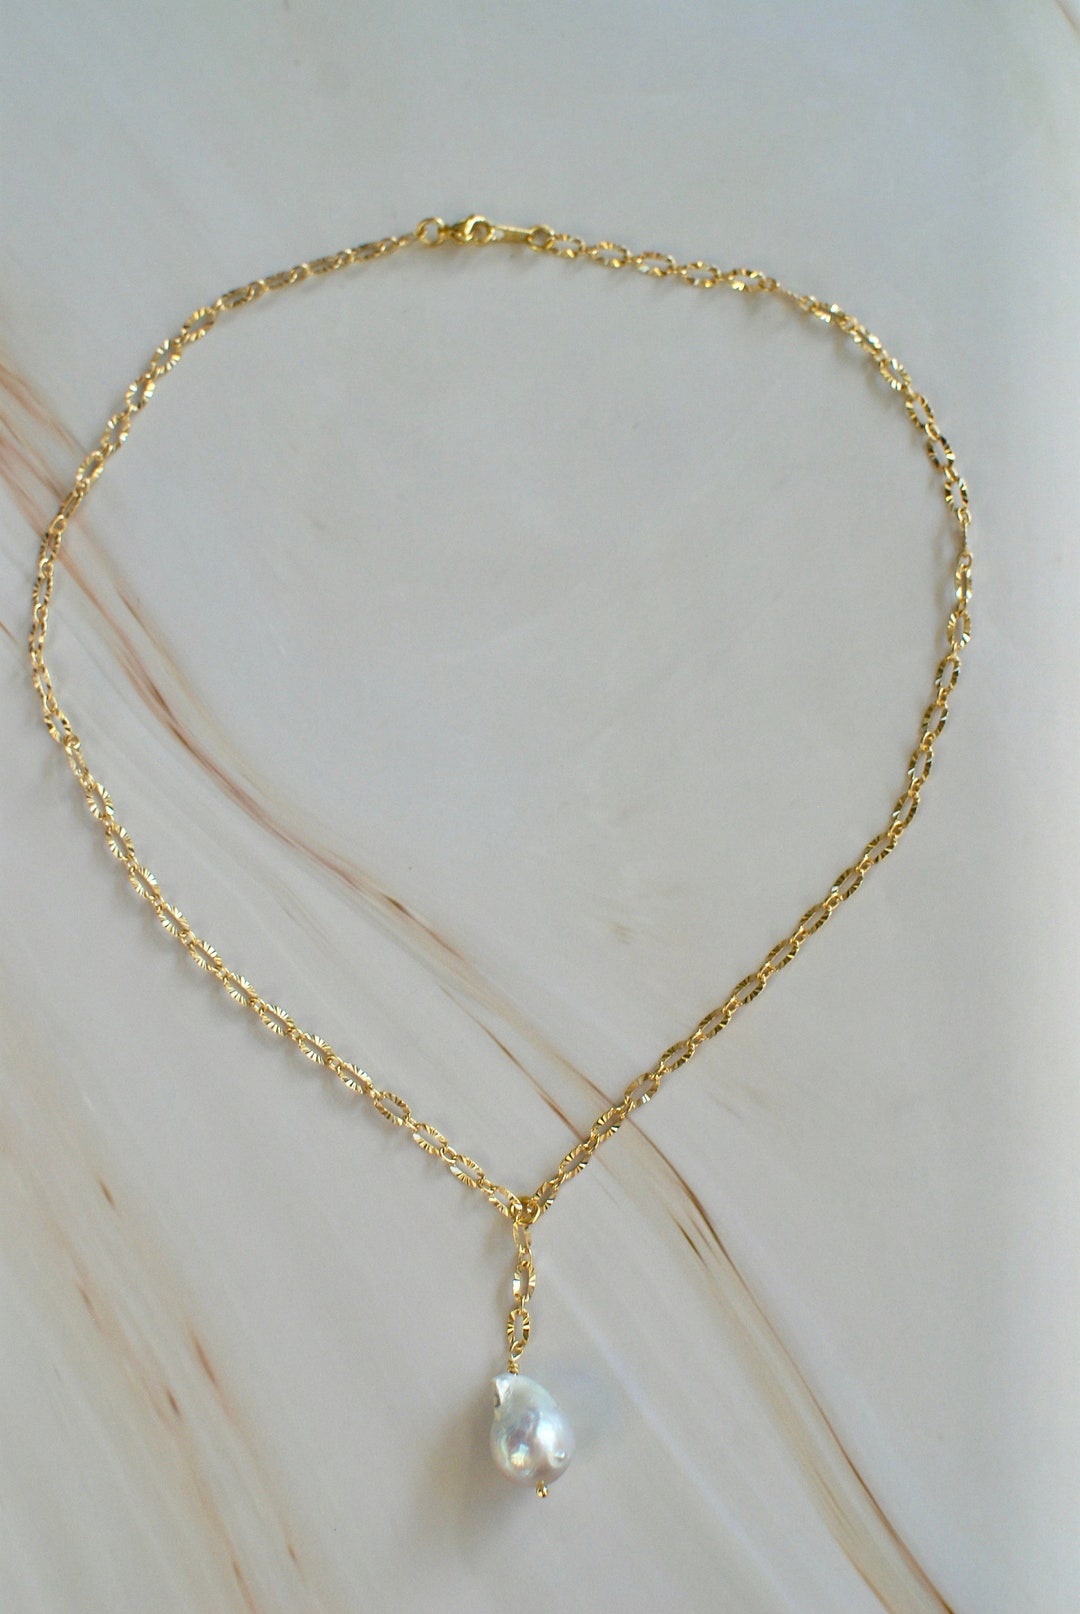 Isla Pearl Drop Necklace Gold Chain Pearl Pendant Necklace - Etsy